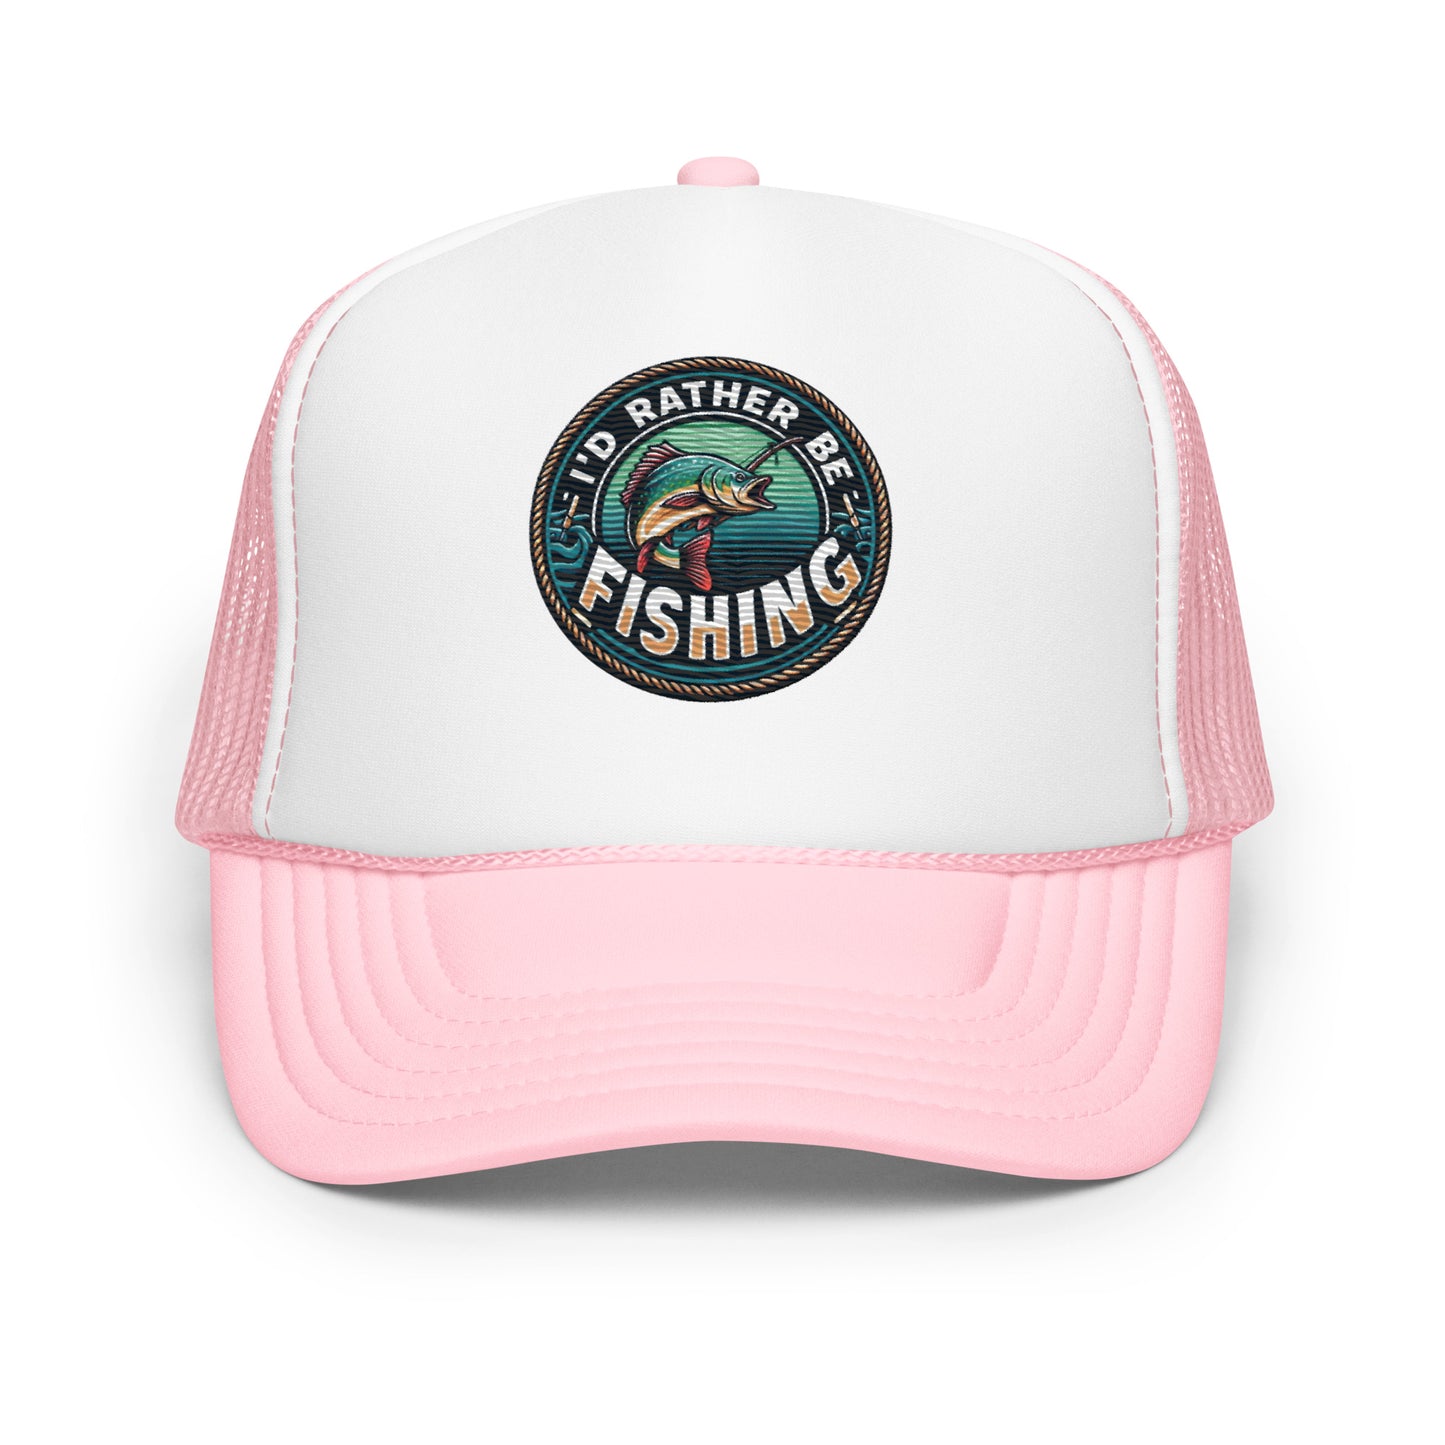 I'd Rather Be Fishing Embroidered Patch Otto Foam Trucker Hat